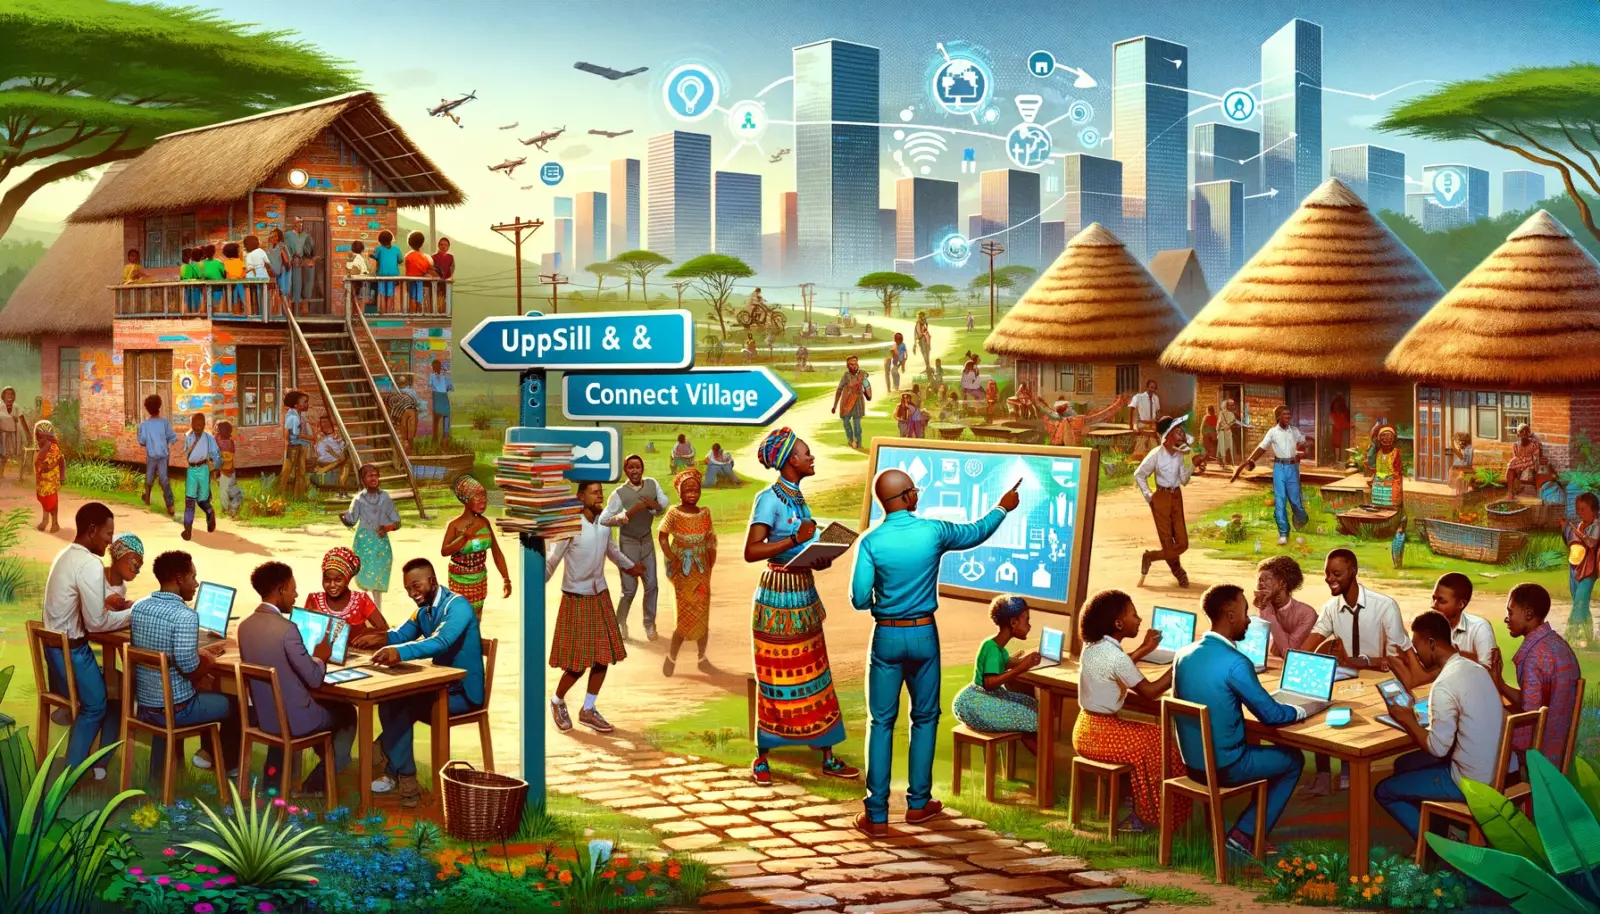 DALL-E - A vibrant modern African village named 'UPSKILL & CONNECT VILLAGE' visible on a signpost. The scene shows different groups of people learning